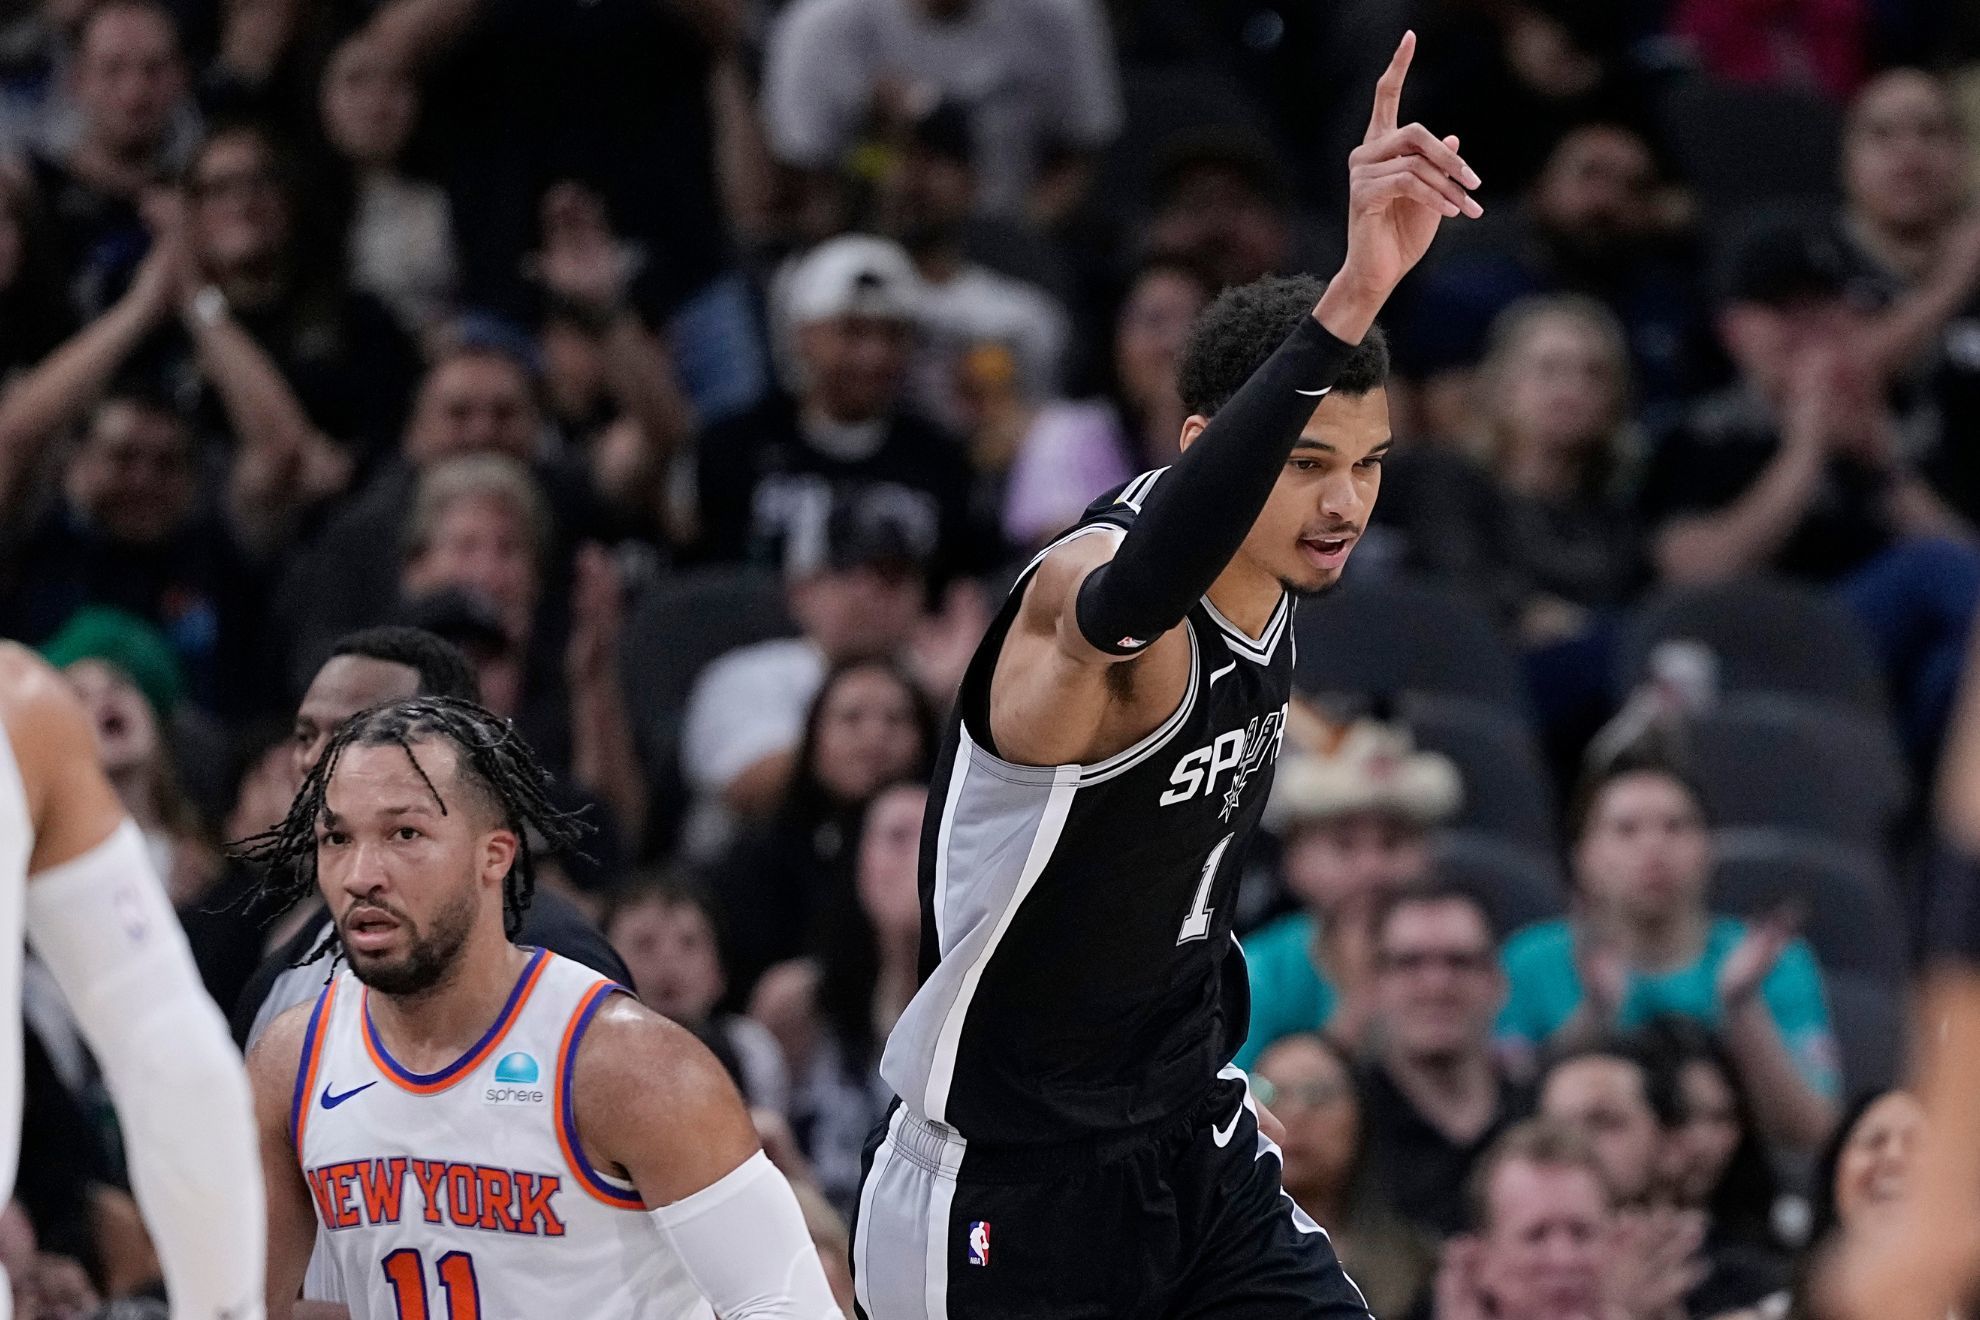 Brunsons 61 points not enough as Wembanyama carries Spurs past Knicks